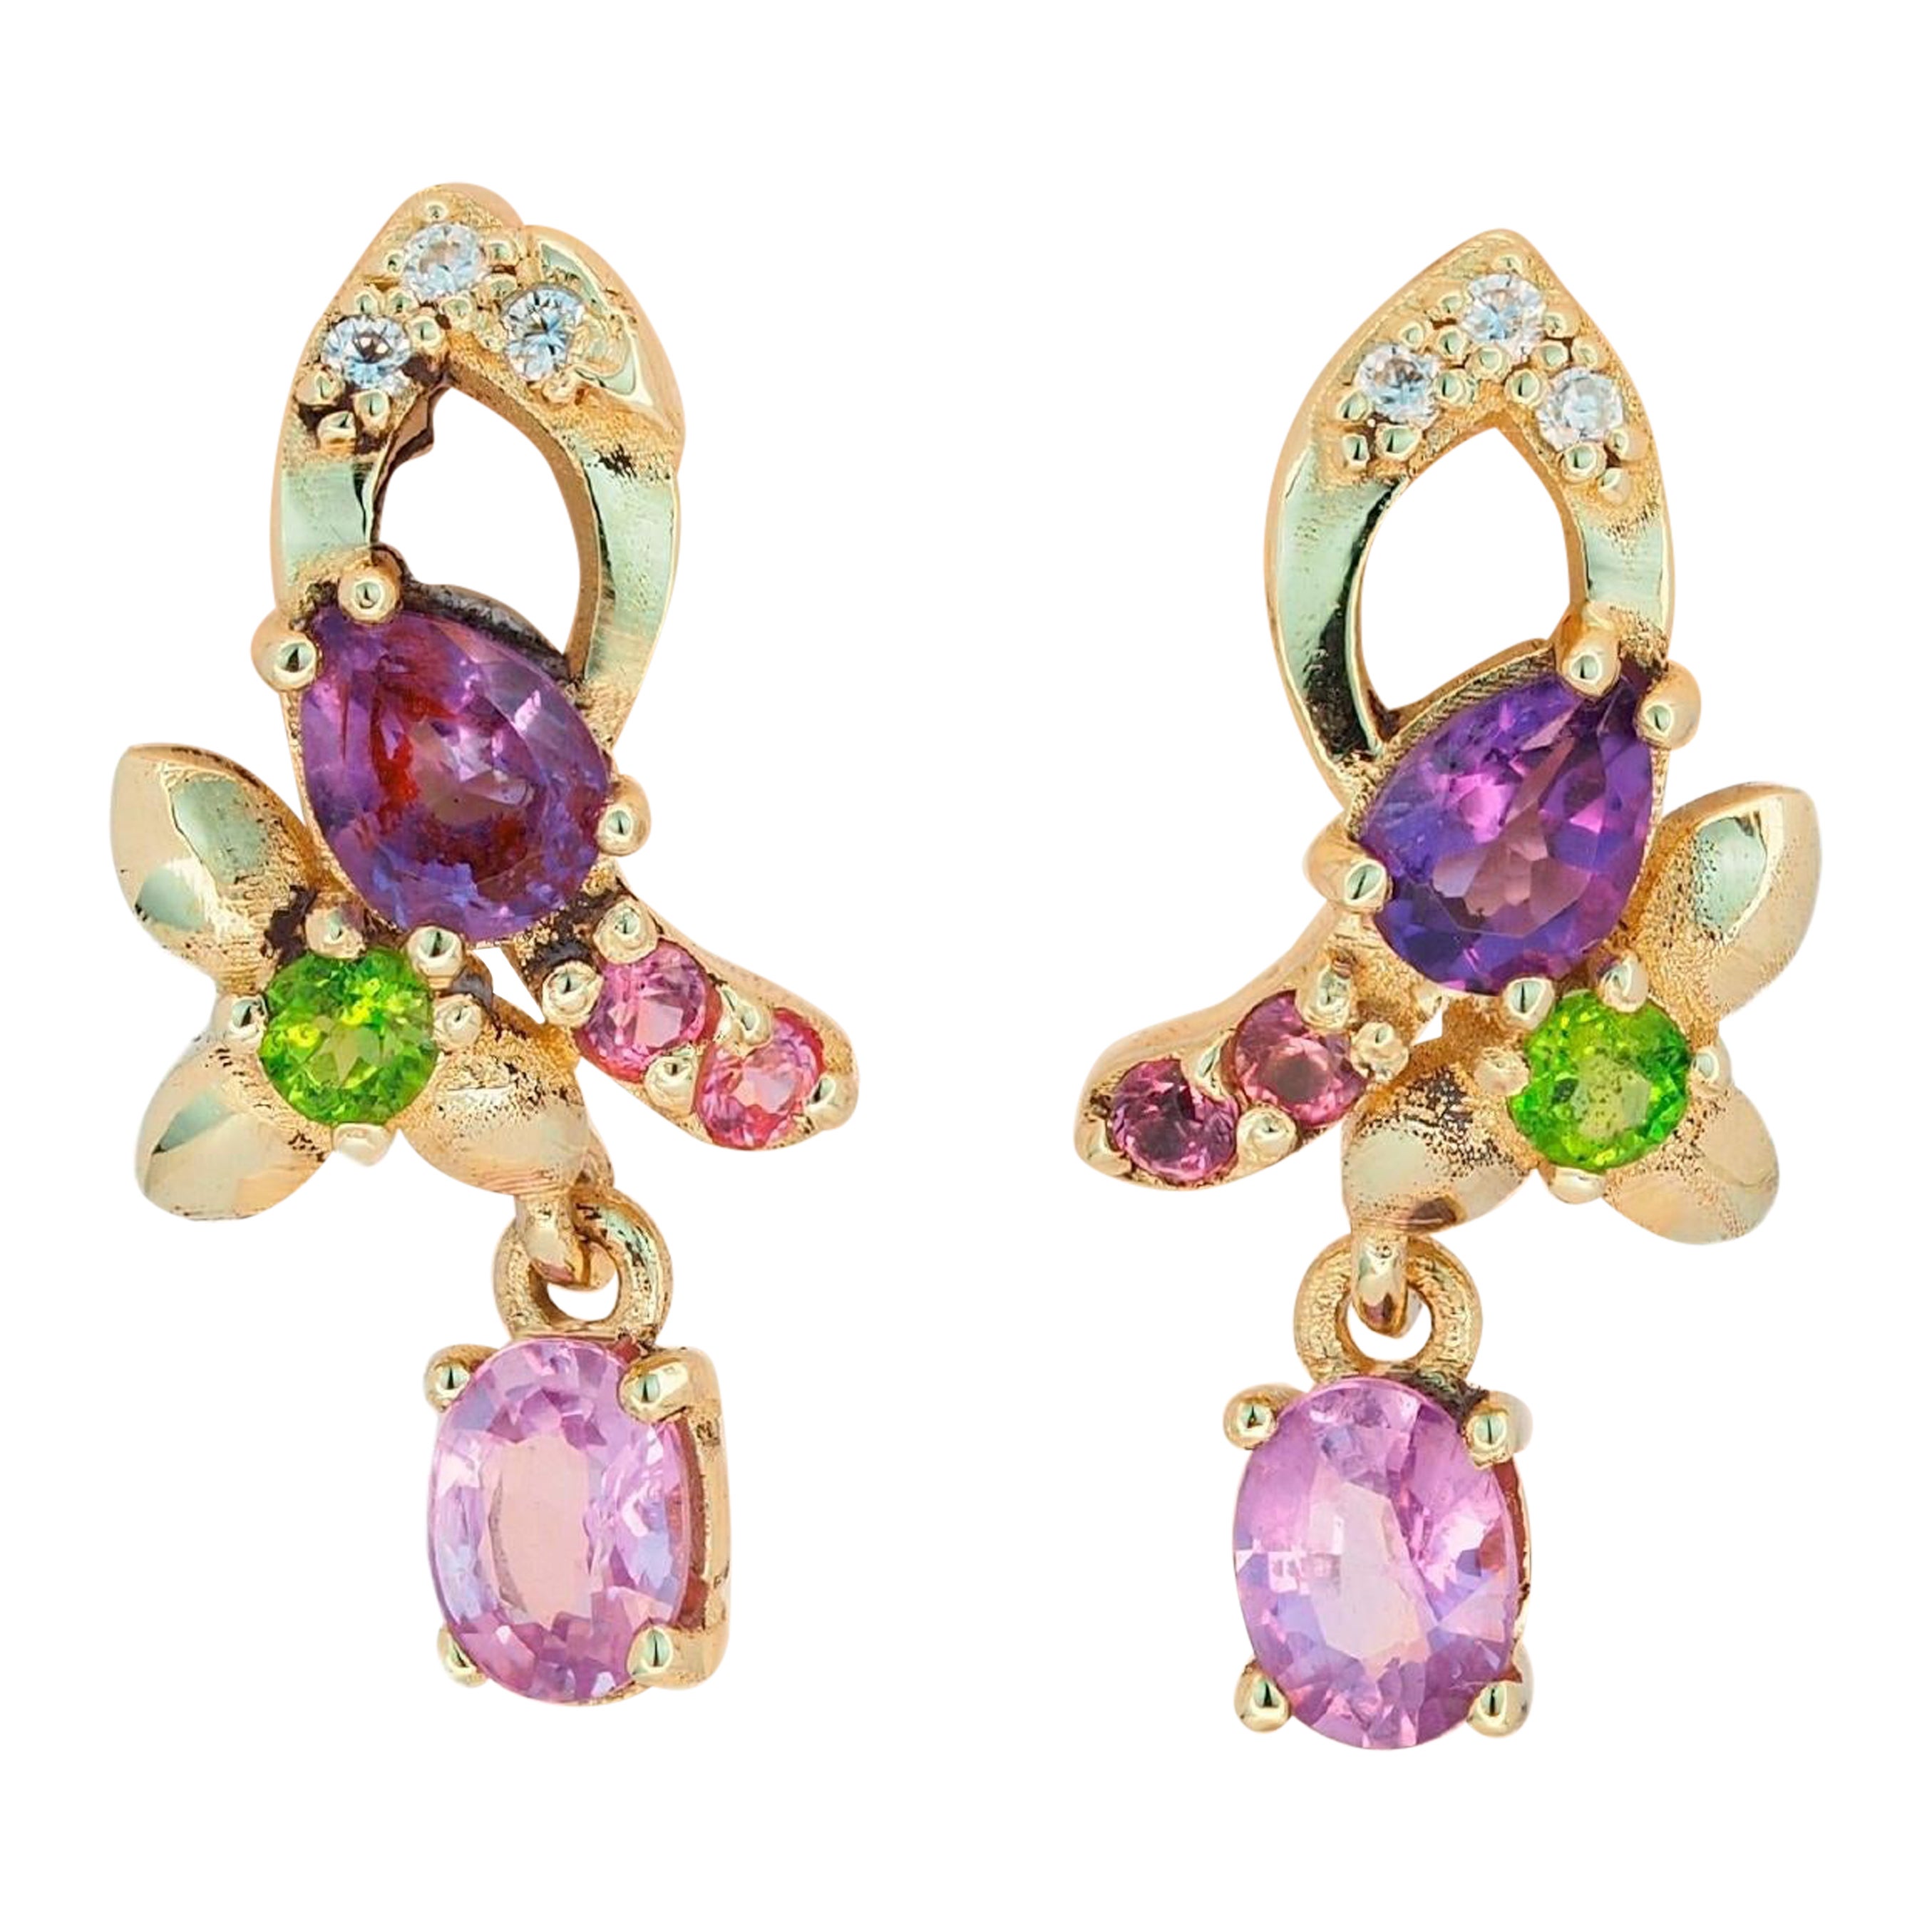 14 Karat Gold Earrings Studs with Sapphires and Multicolores Gemstones